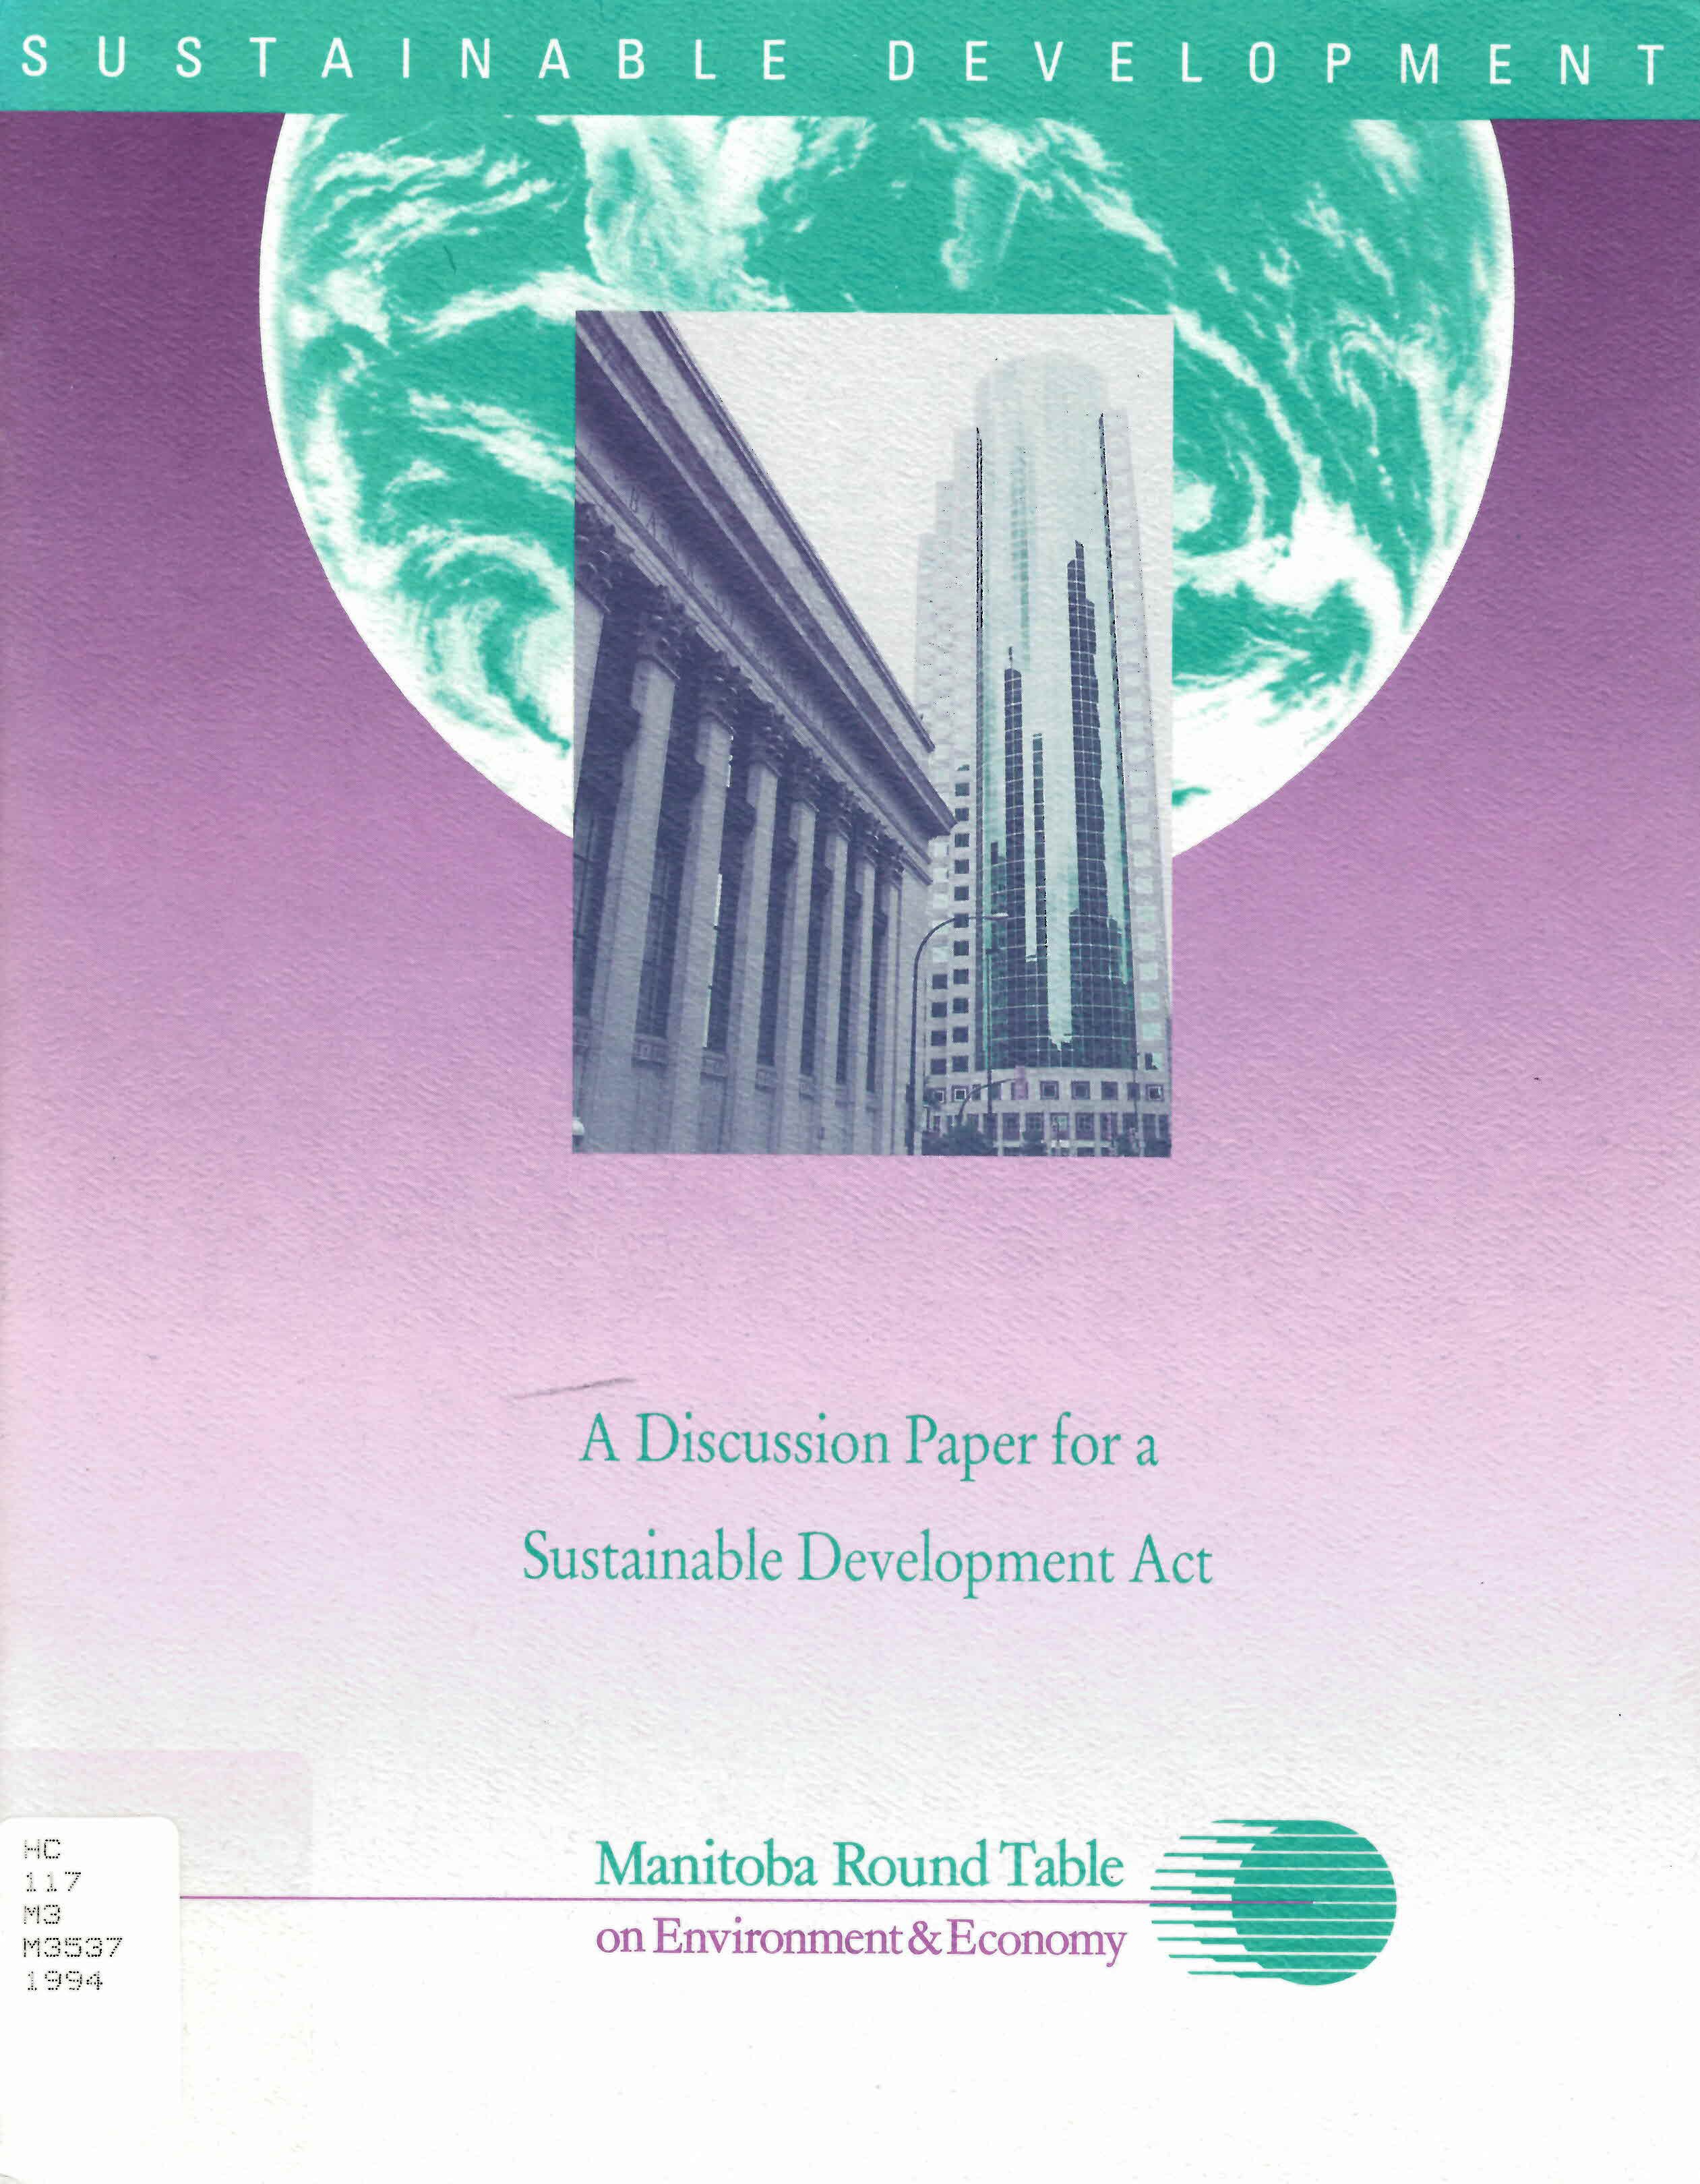 A discussion paper for a sustainable development act